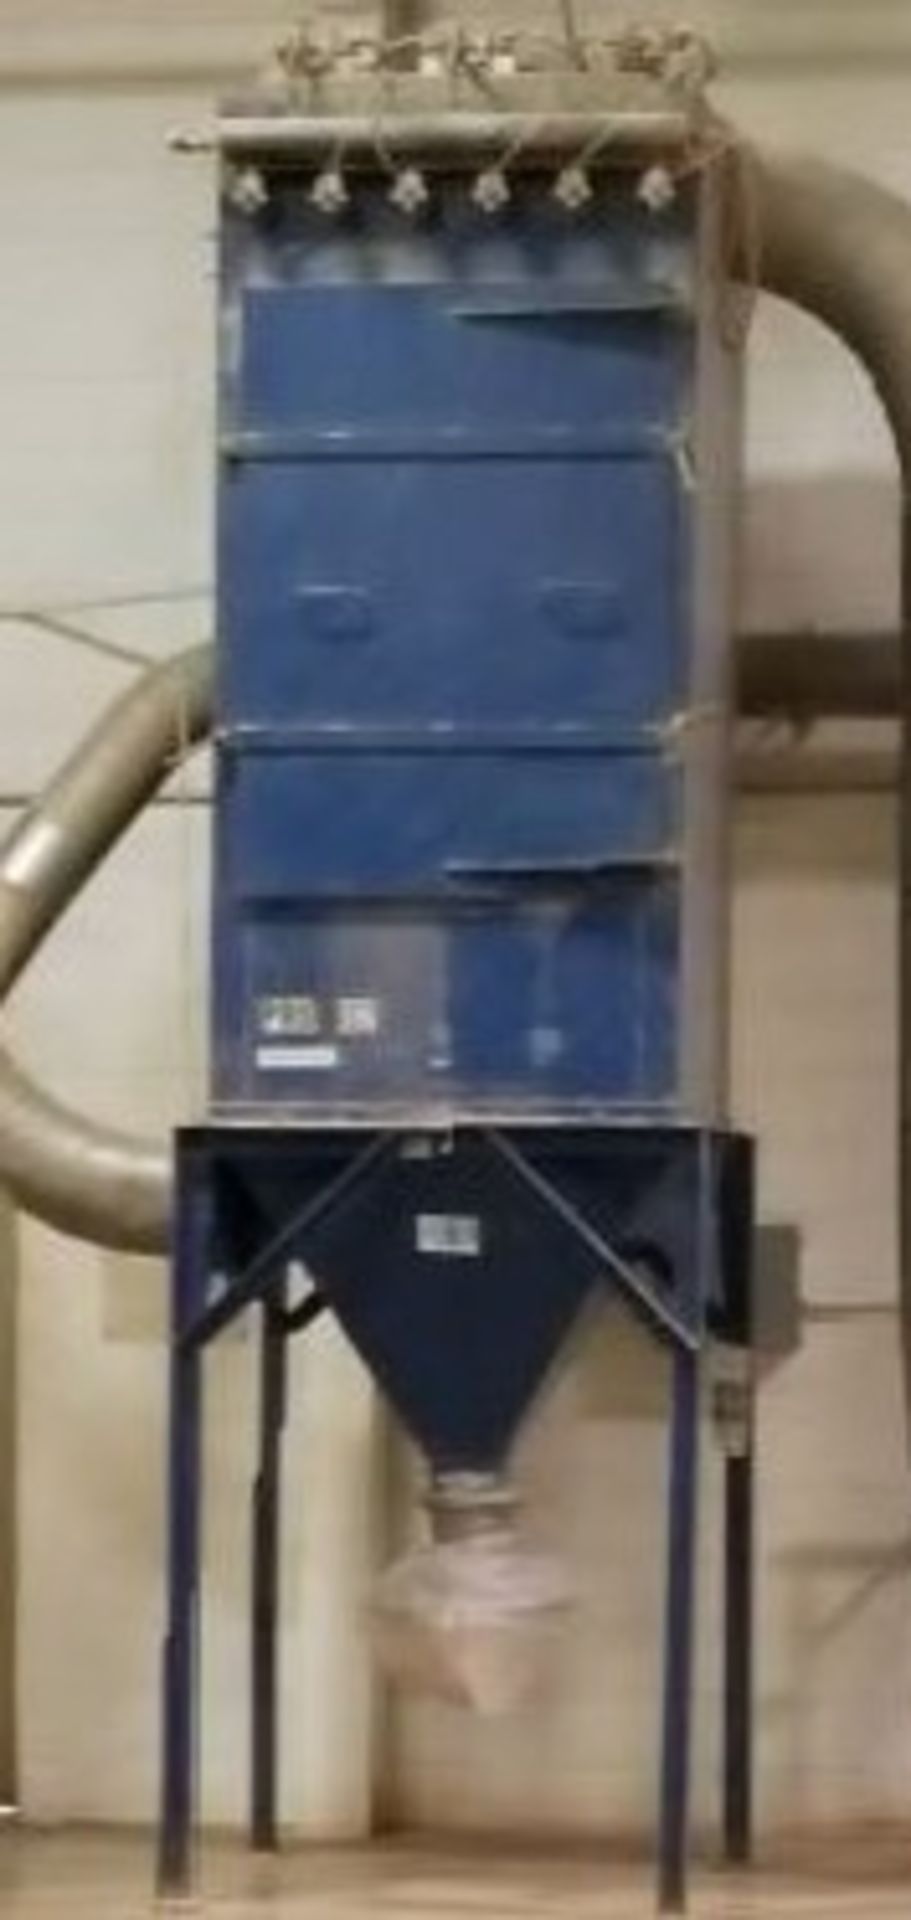 Dust collector (MFG unknown) with pulse jet cleaning system and Dayton paddle wheel style blower